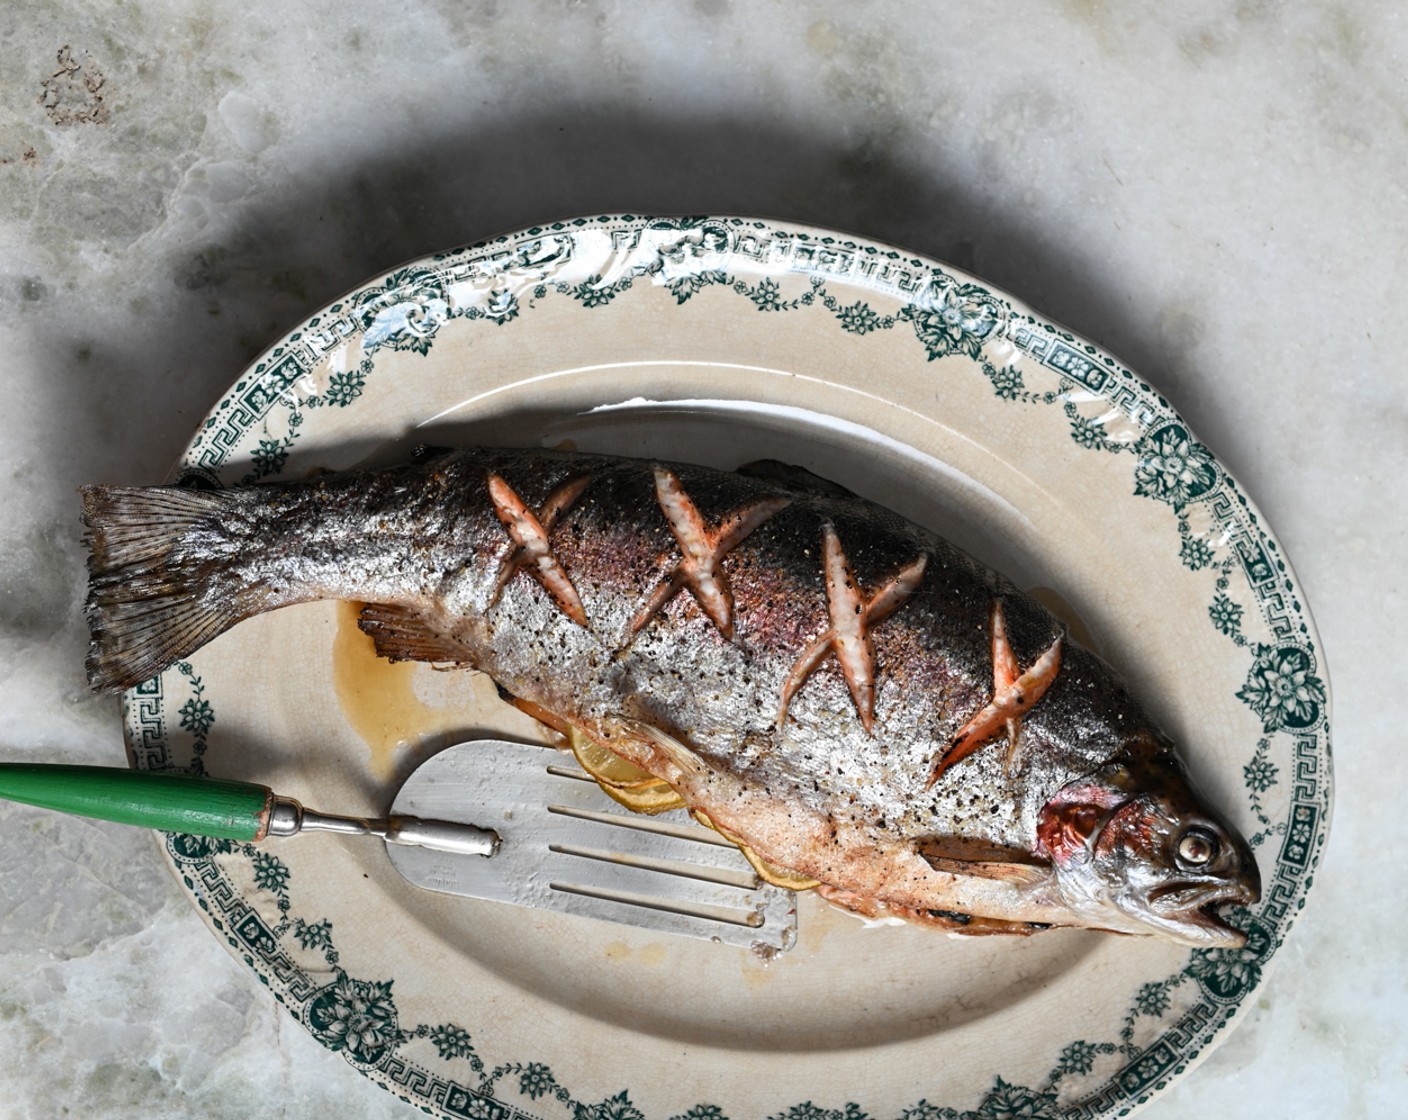 step 4 Season the trout’s skin with more salt and pepper and roast the fish in the oven for 20-25 minutes or until the skin is crispy and the flesh is flaking.